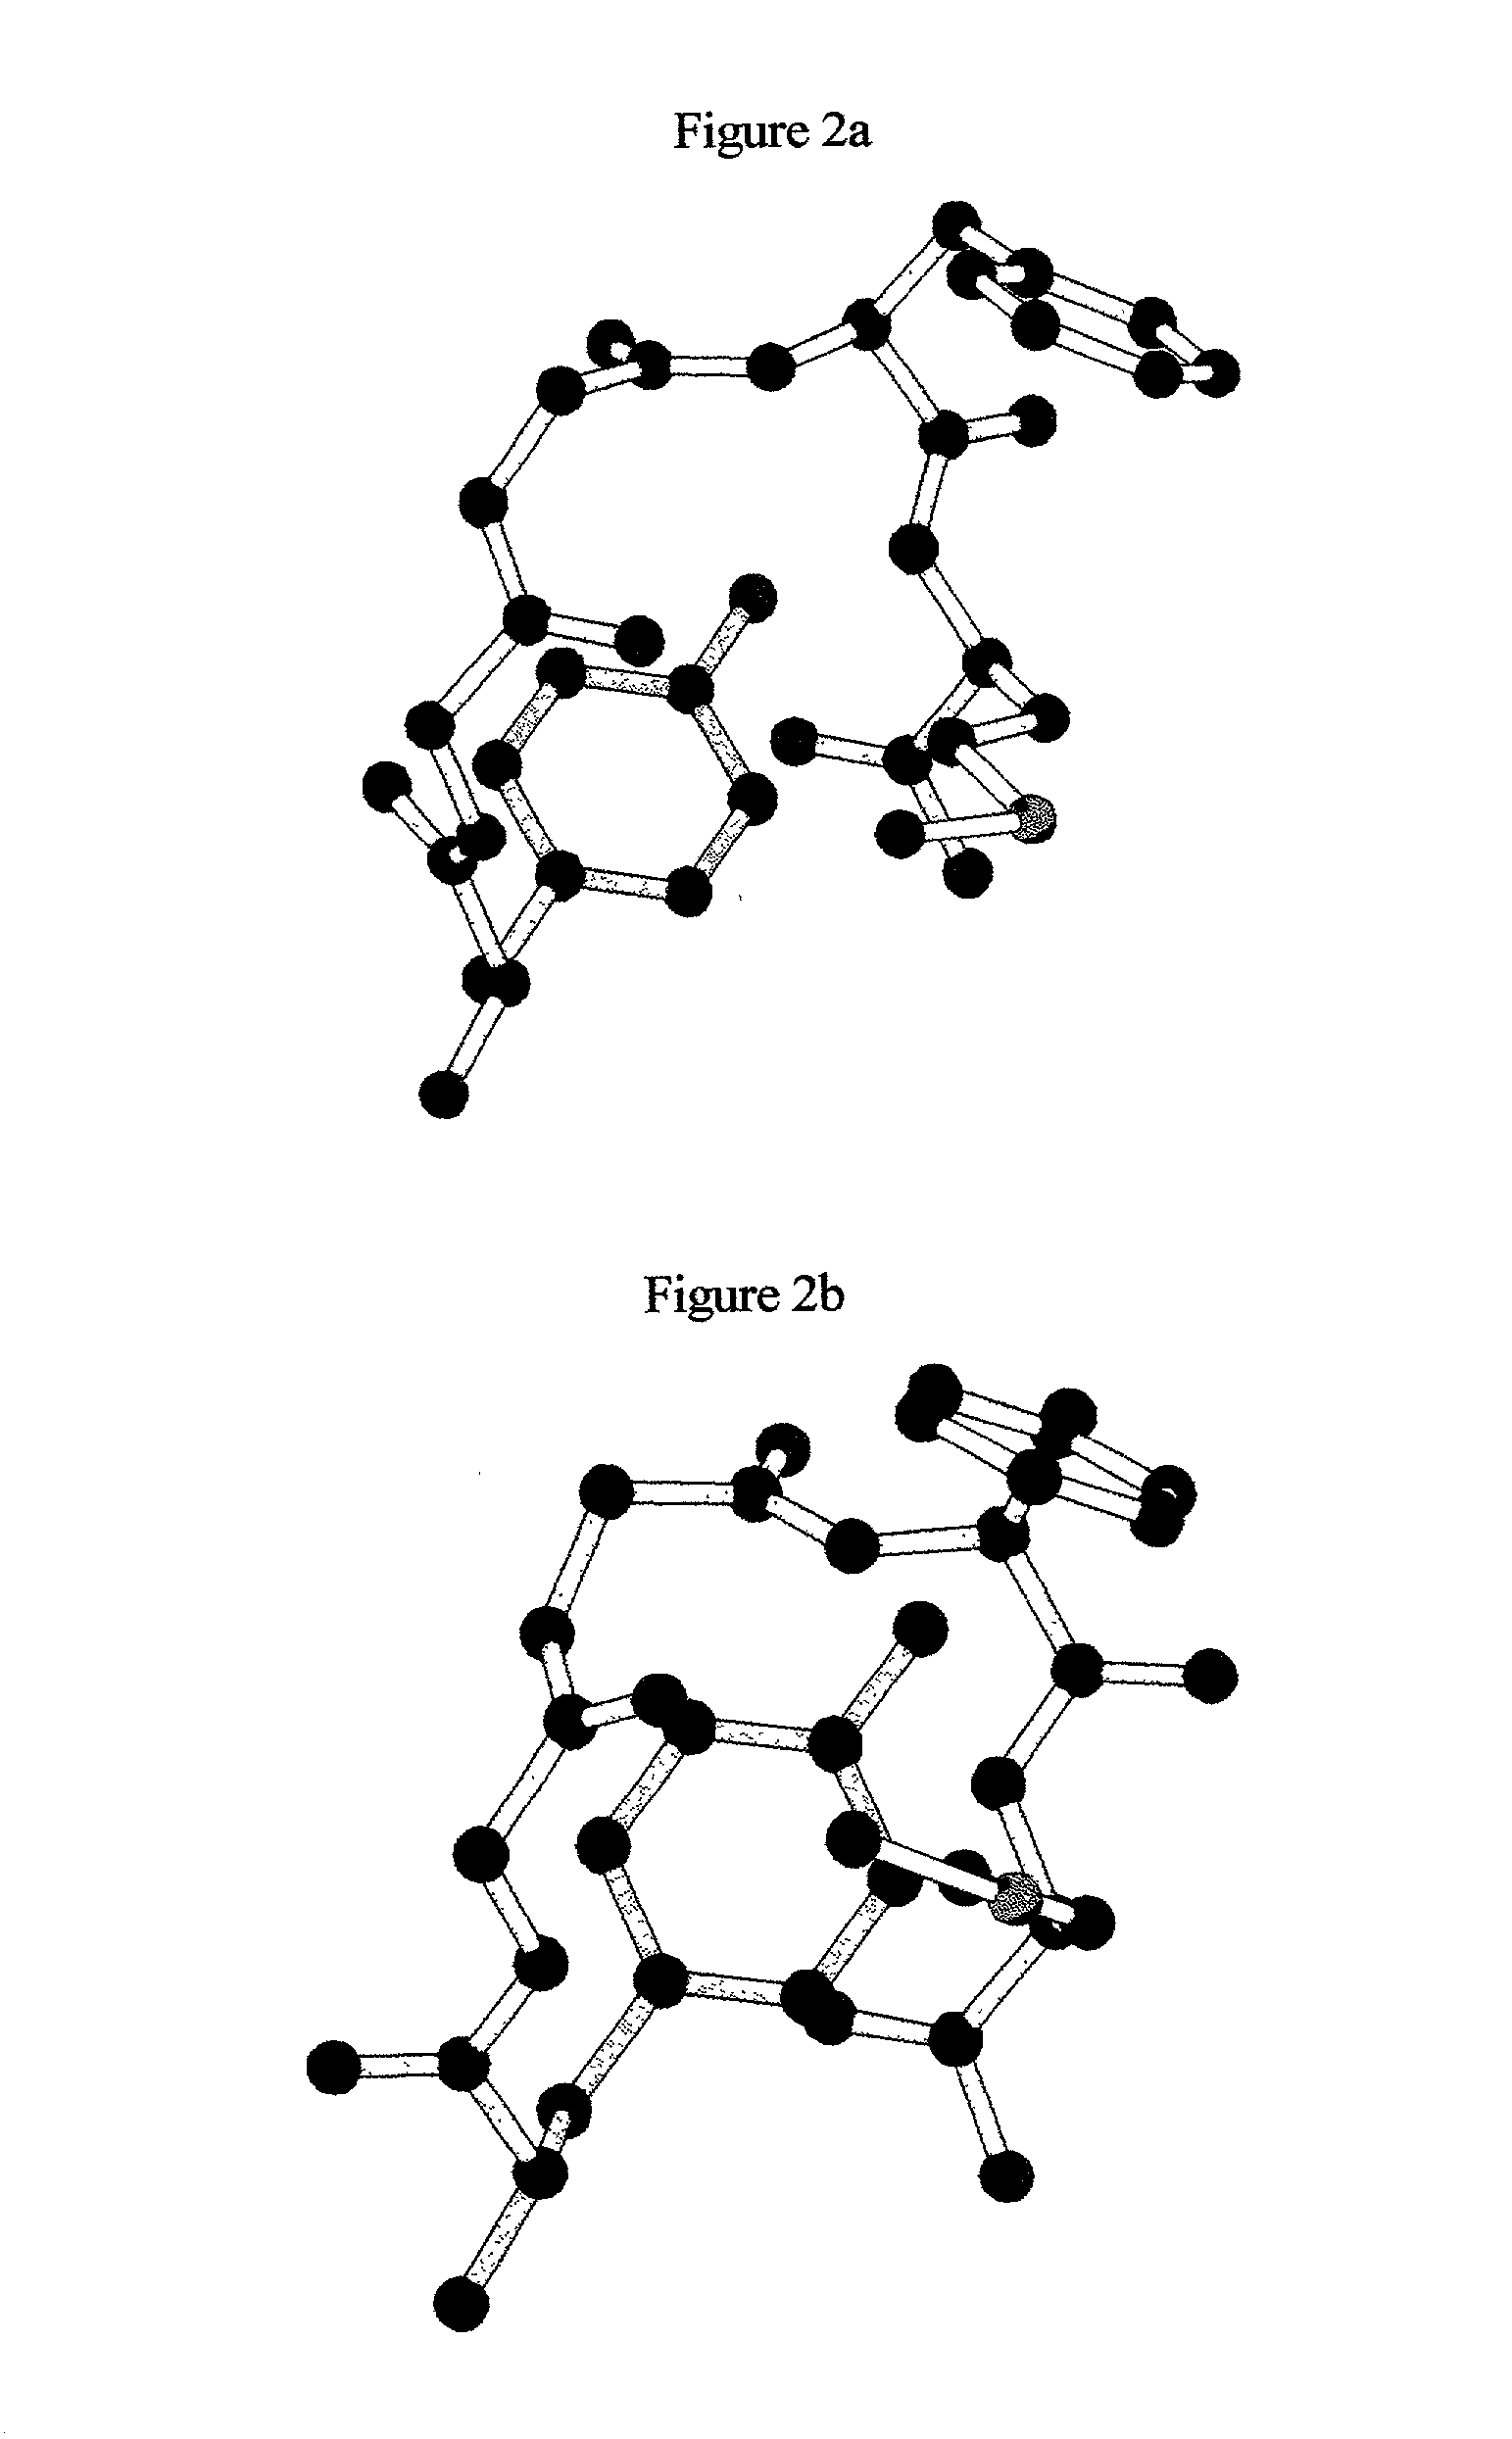 Method and system to build optimal models of 3-dimensional molecular structures